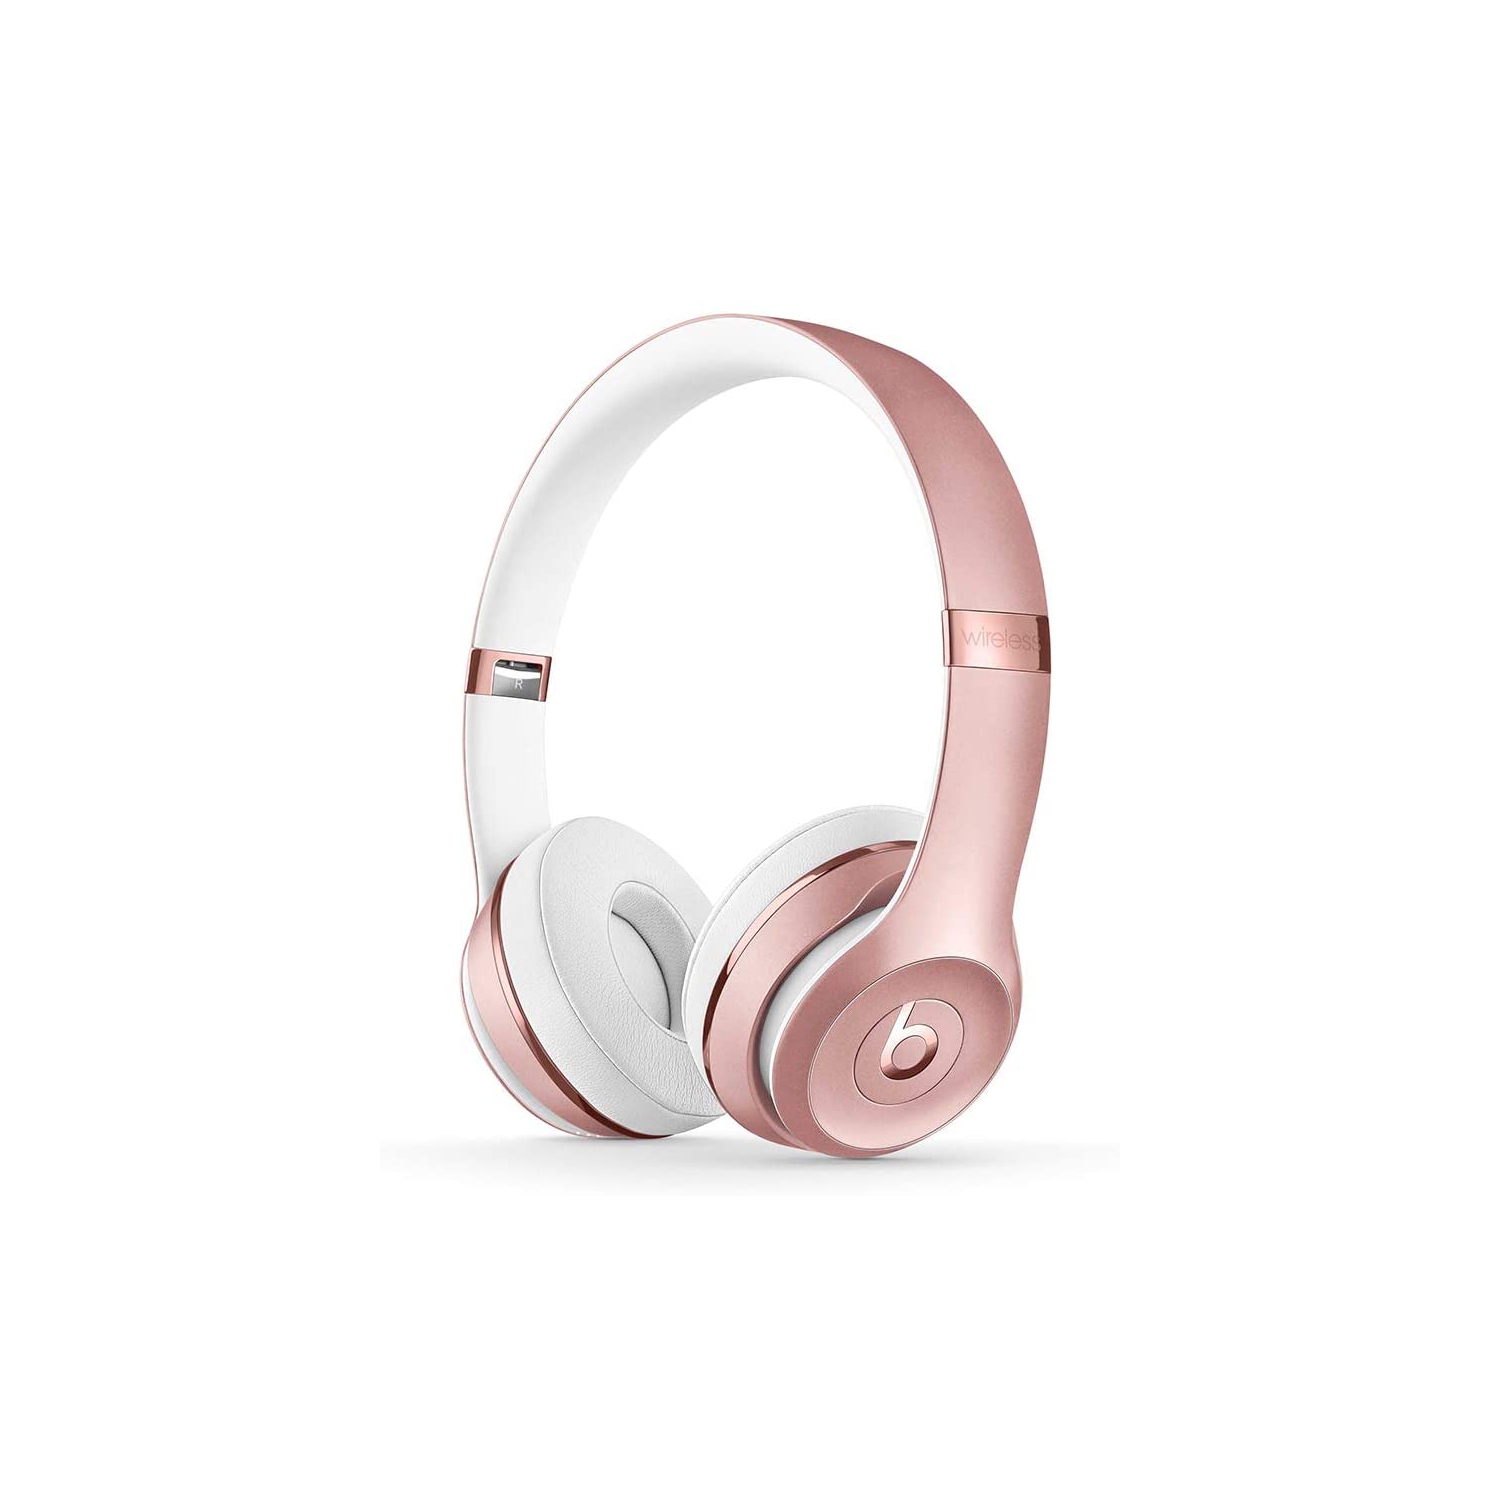 Refurbished (Excellent) - Beats Solo³ On-Ear Wireless Headphones - Rose Gold - Certified Refurbished